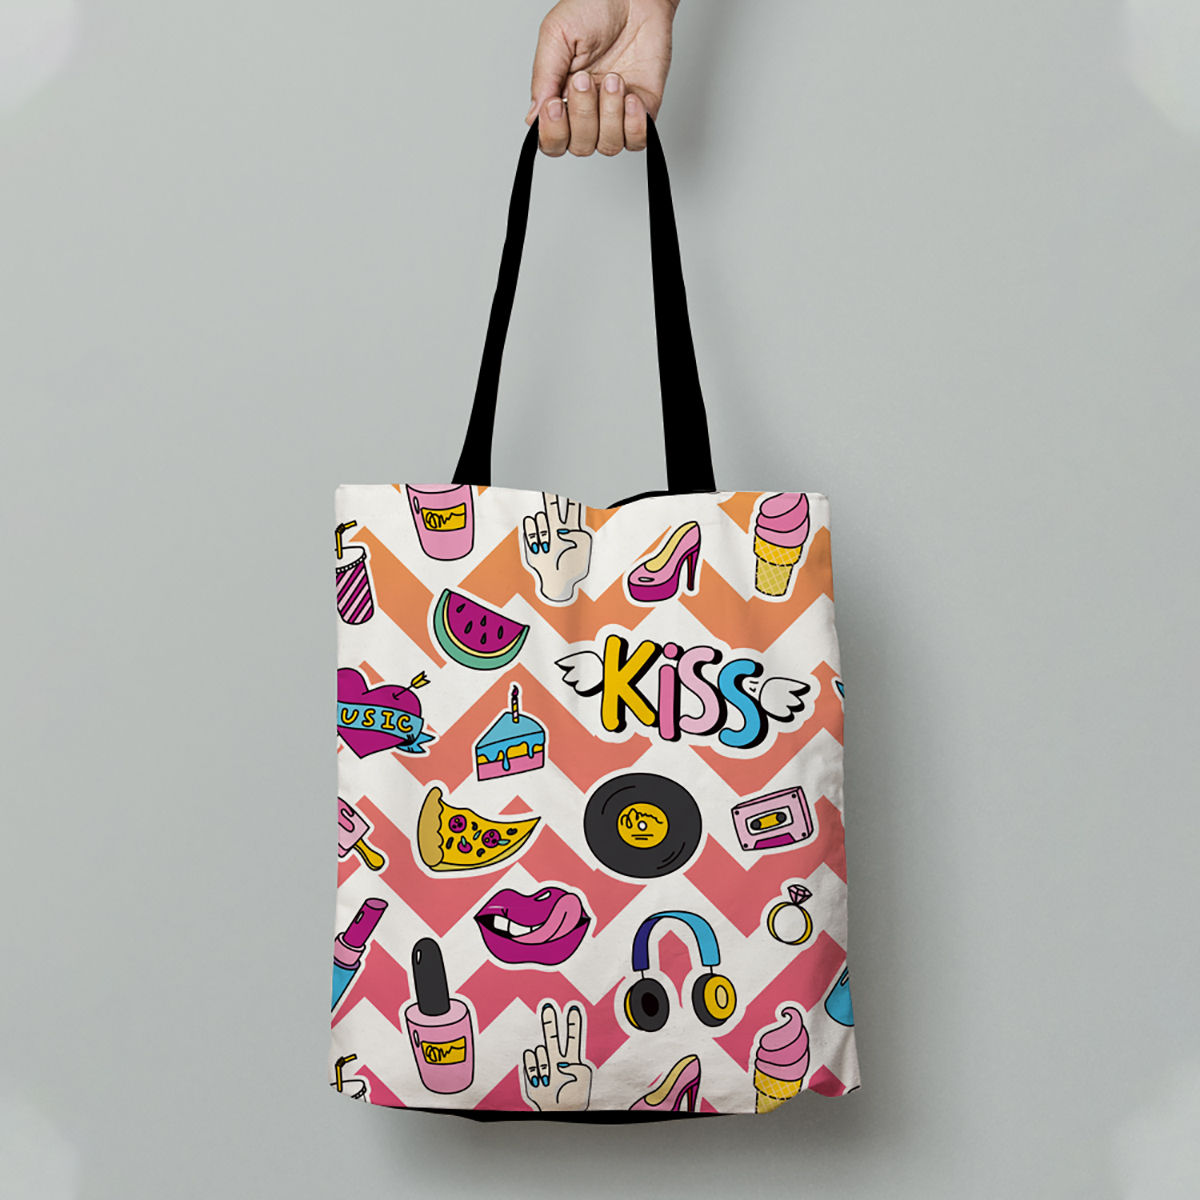 Tote bags for women are super stylish and quirky, a must-have for ladies |  HT Shop Now